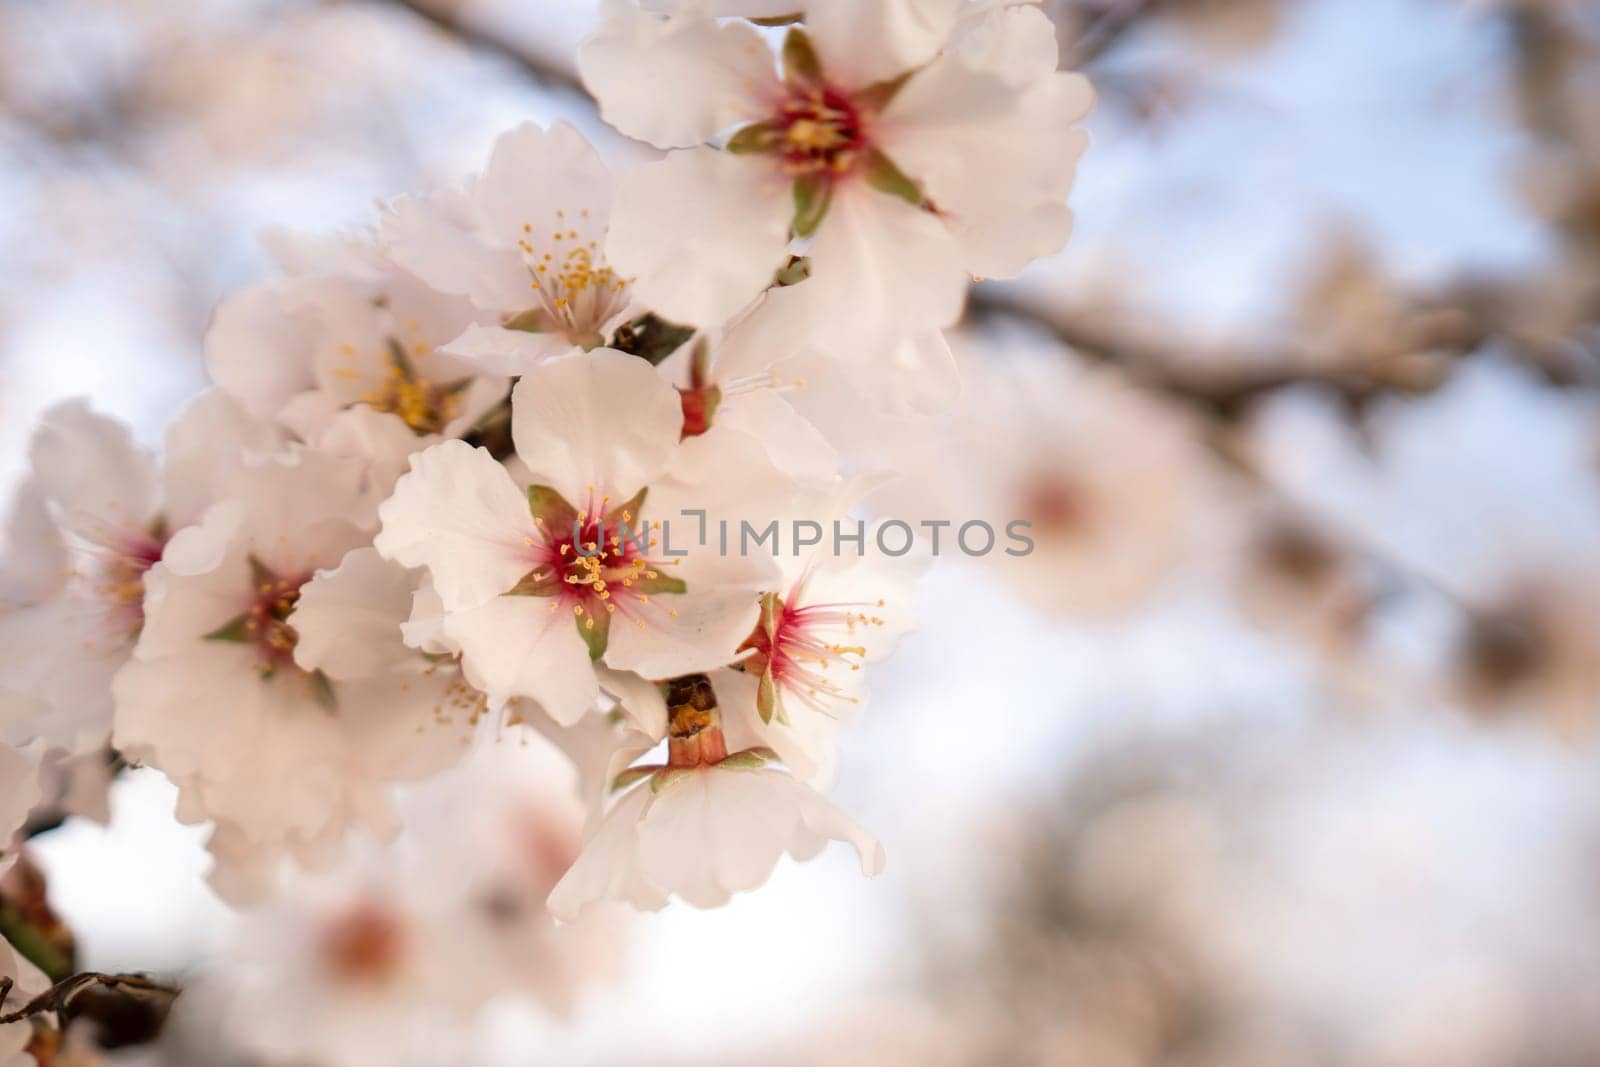 white blossoms almond spring, adorn tree branches under bright sunlight, marking the arrival of spring